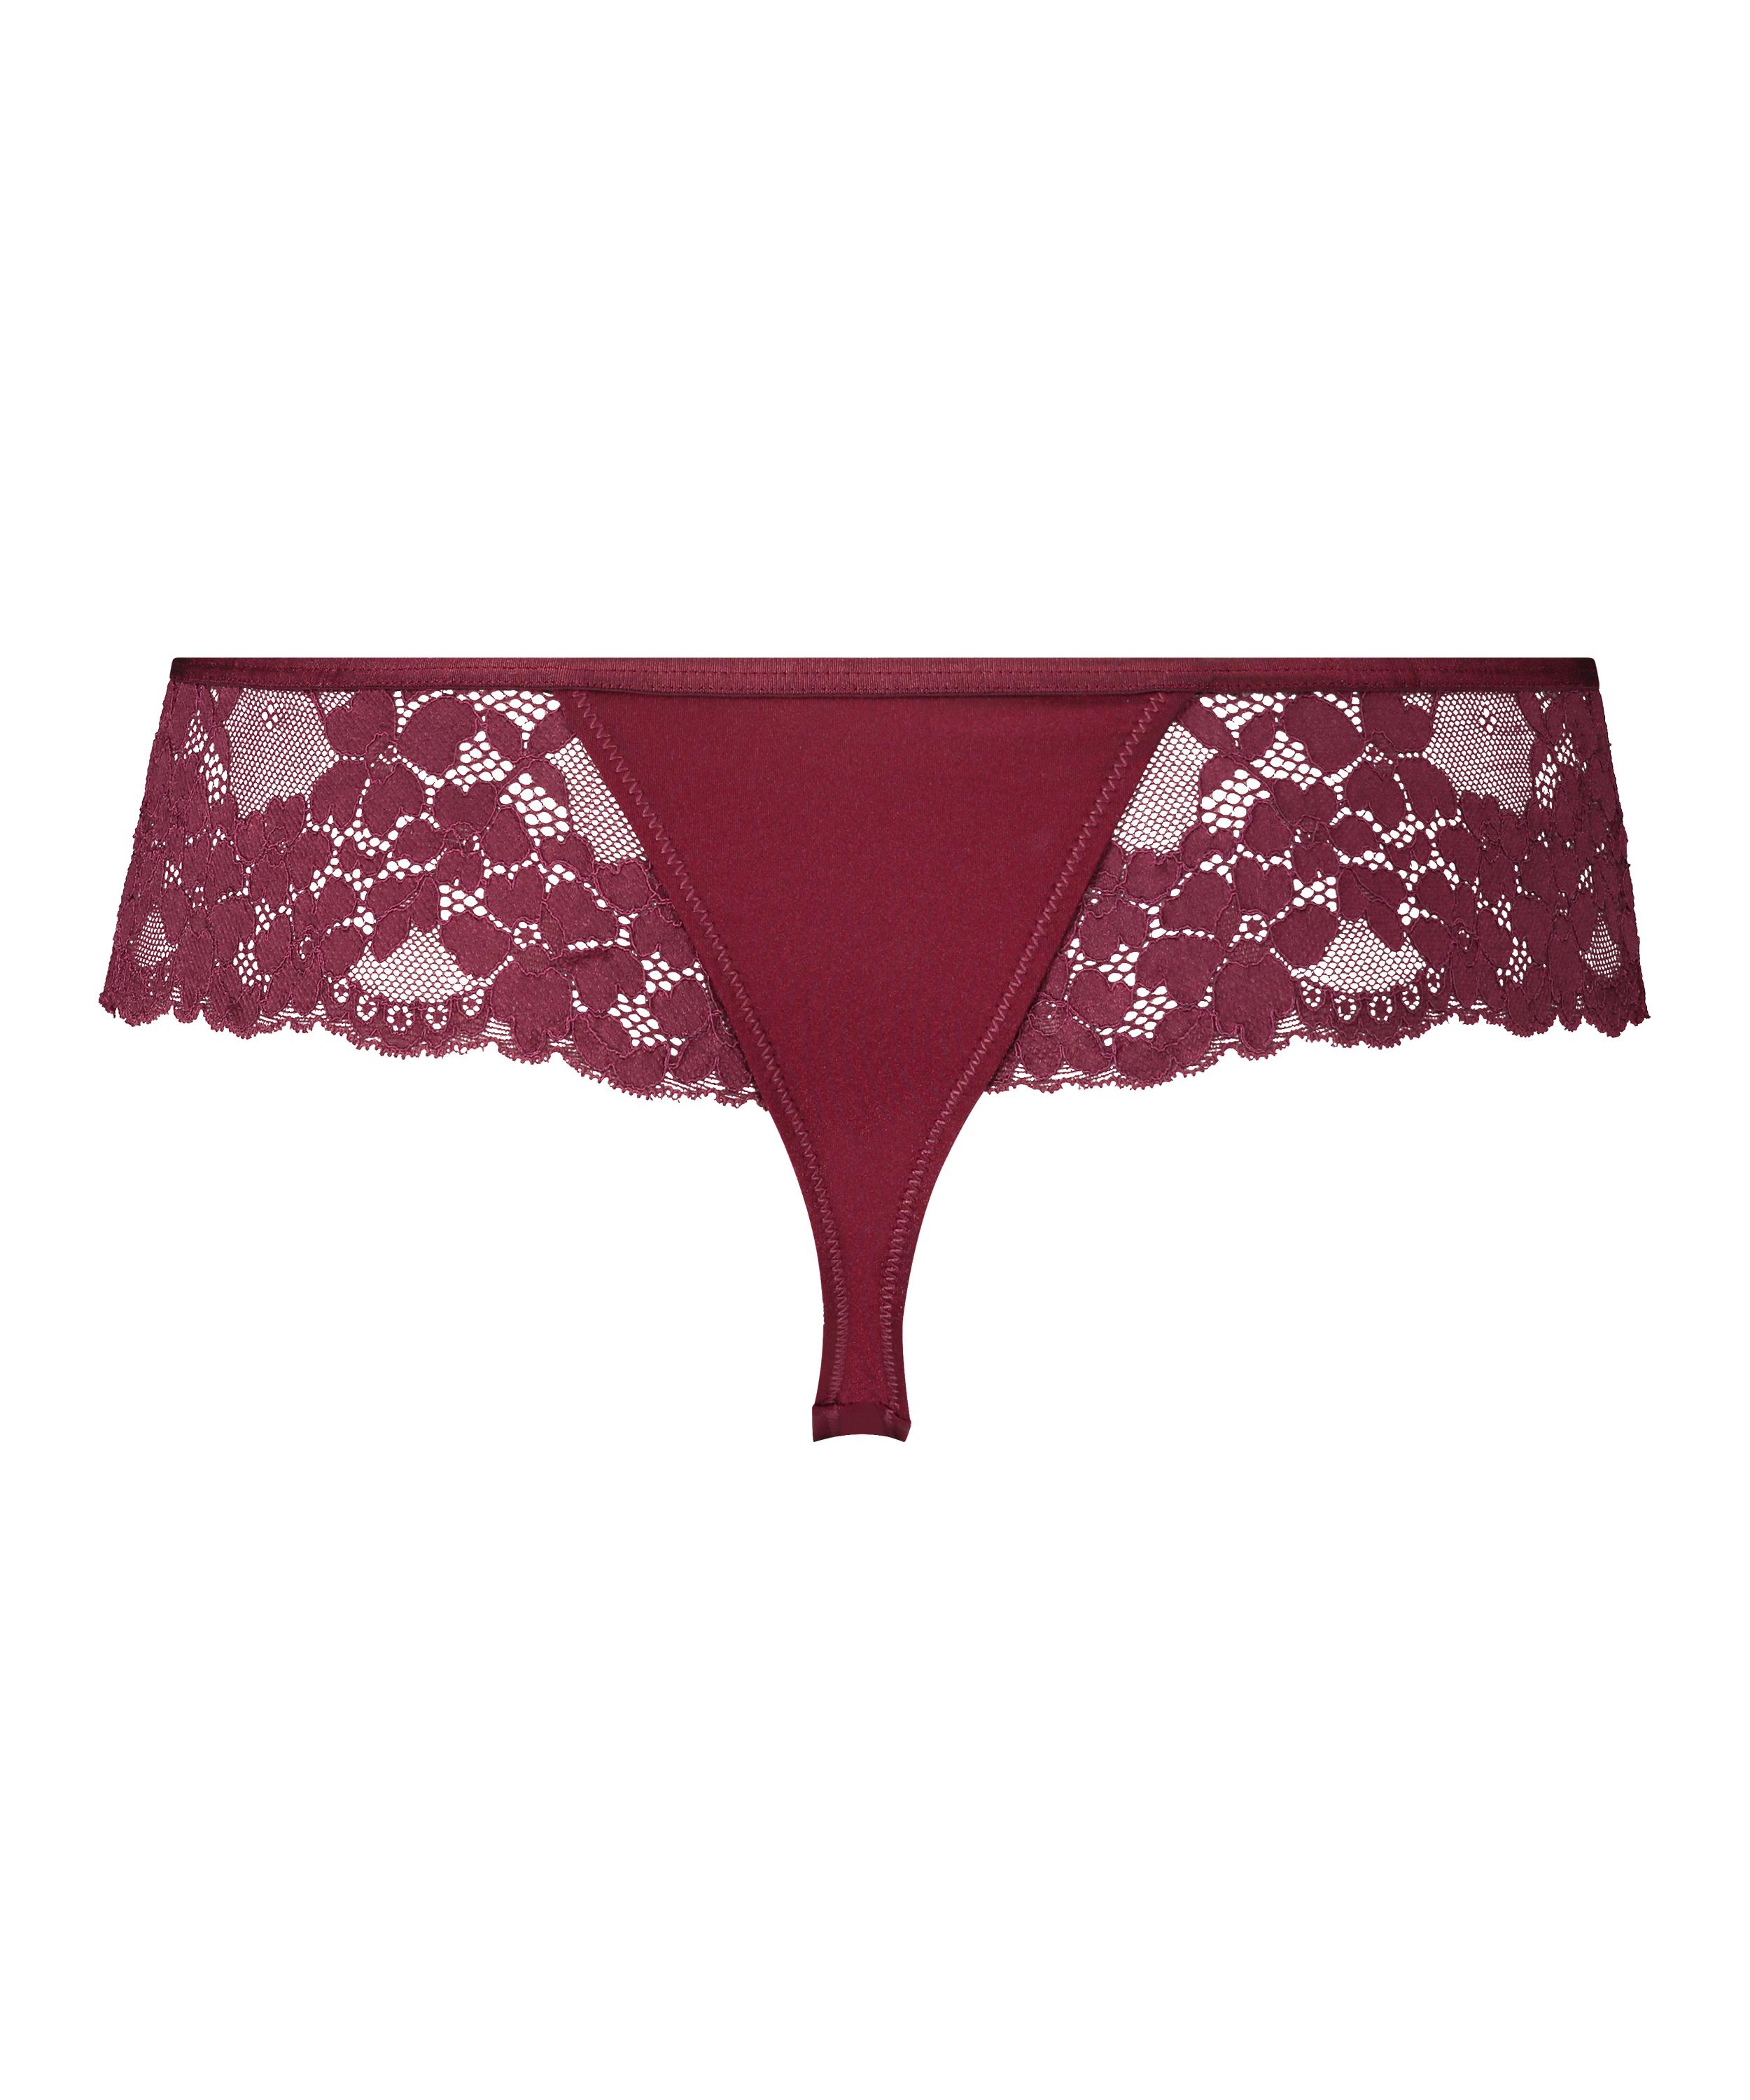 Boxer string Nellie, Rouge, main